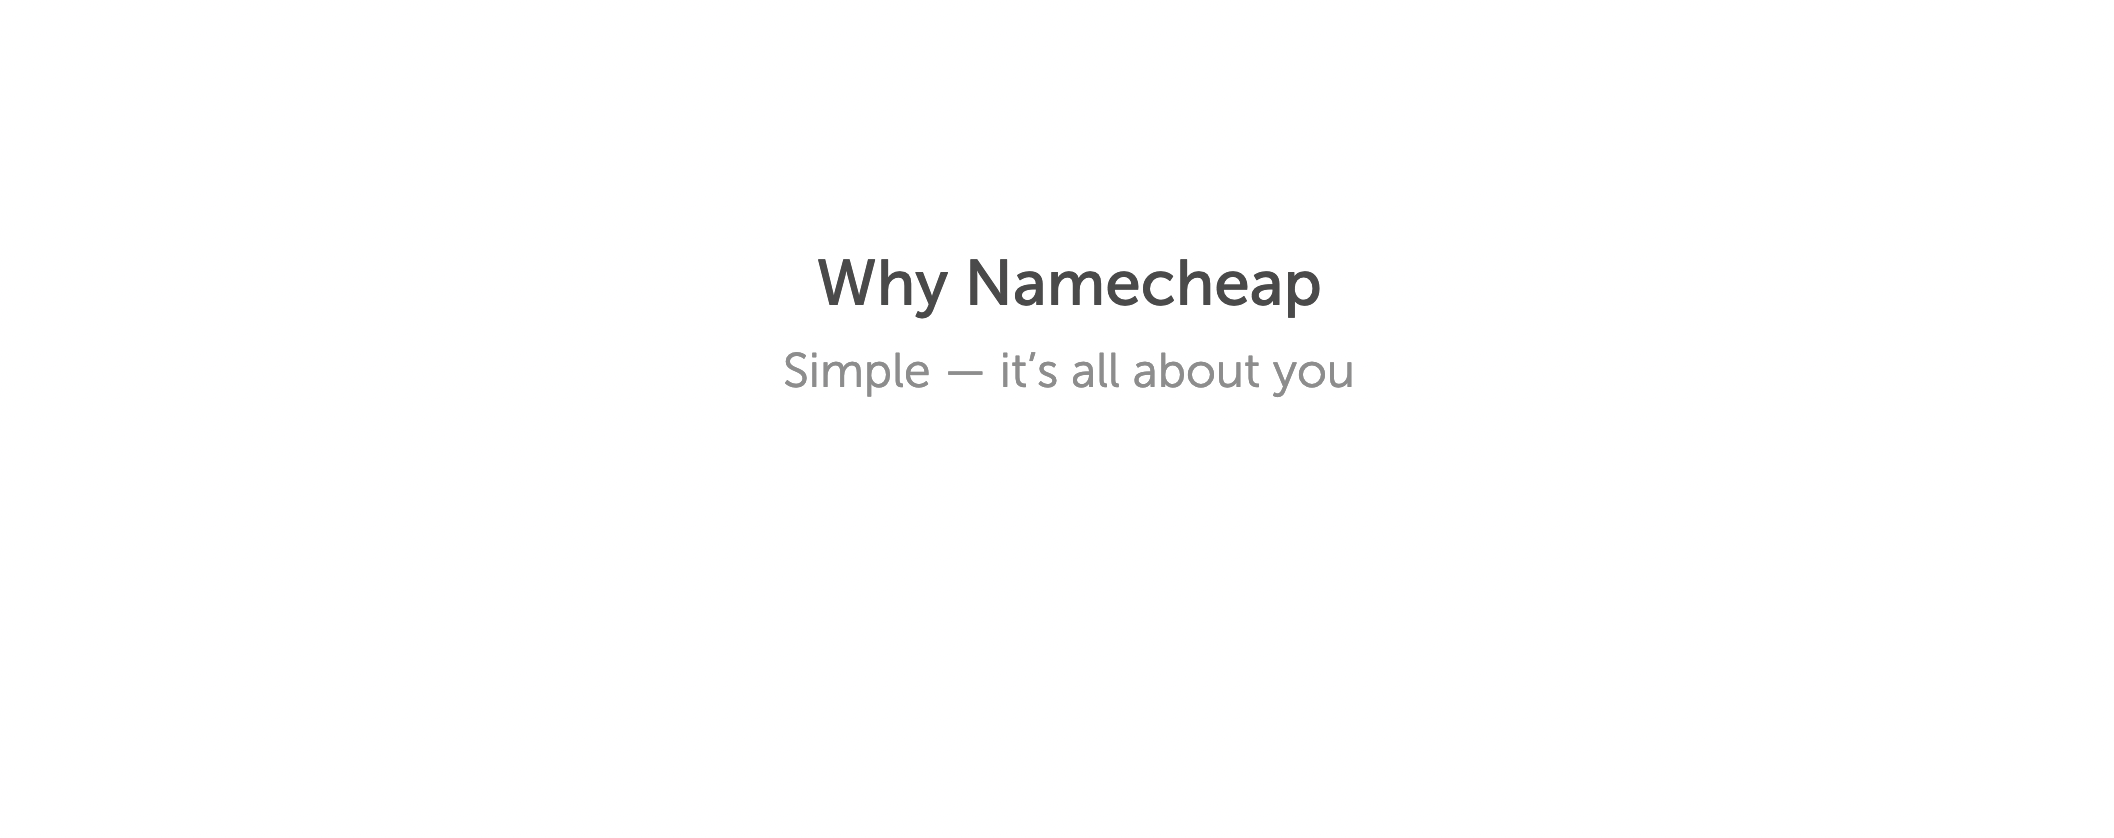 How to Enable DKIM in Namecheap: A Step-by-Step Guide